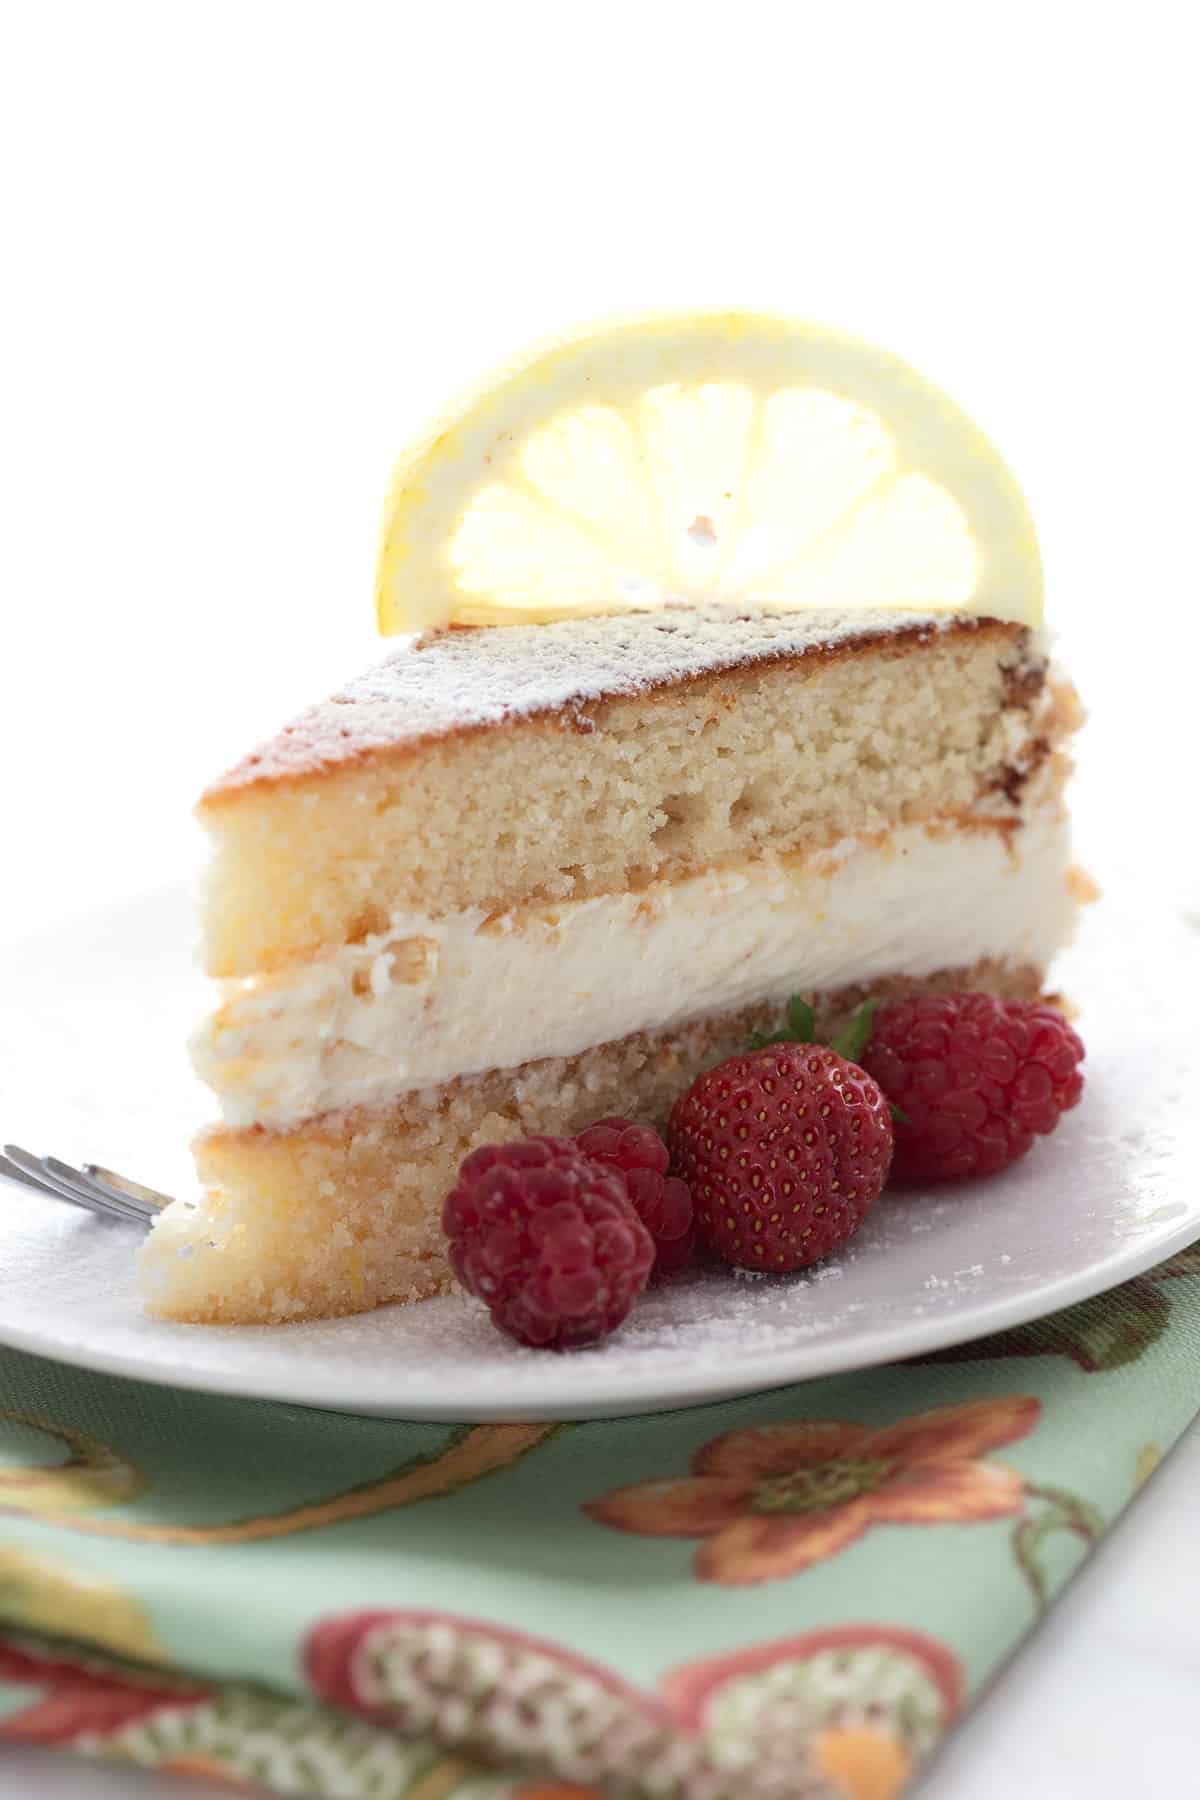 A slice of keto lemon cake on a white plate with berries on the side and a lemon slice on top.